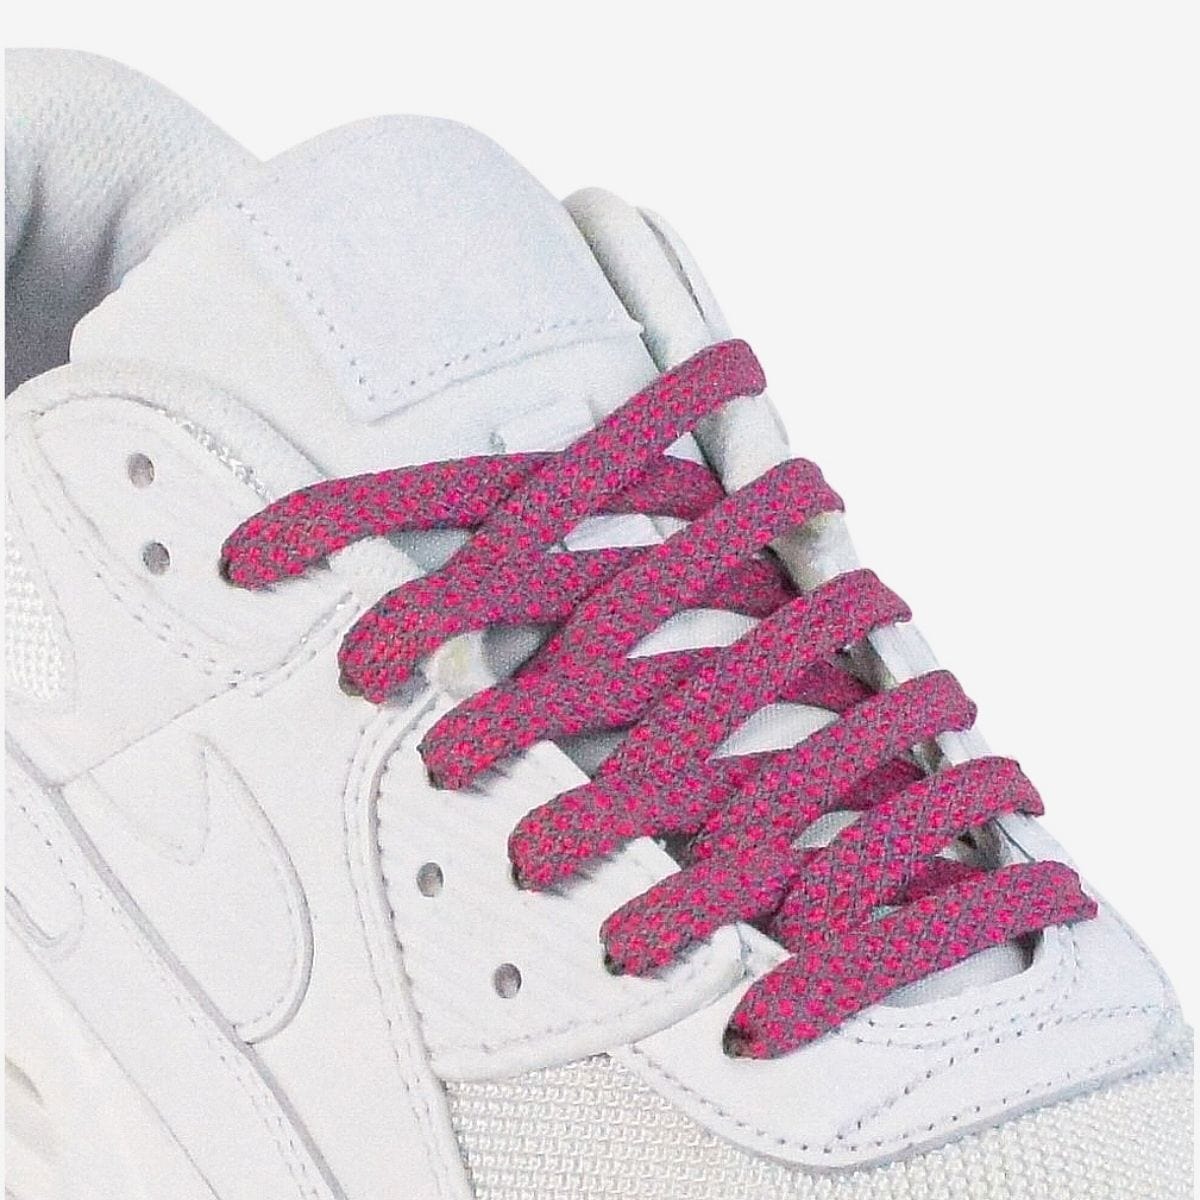 reflective-flat-shoelaces-in-rose-pink-suitable-for-popular-sneakers